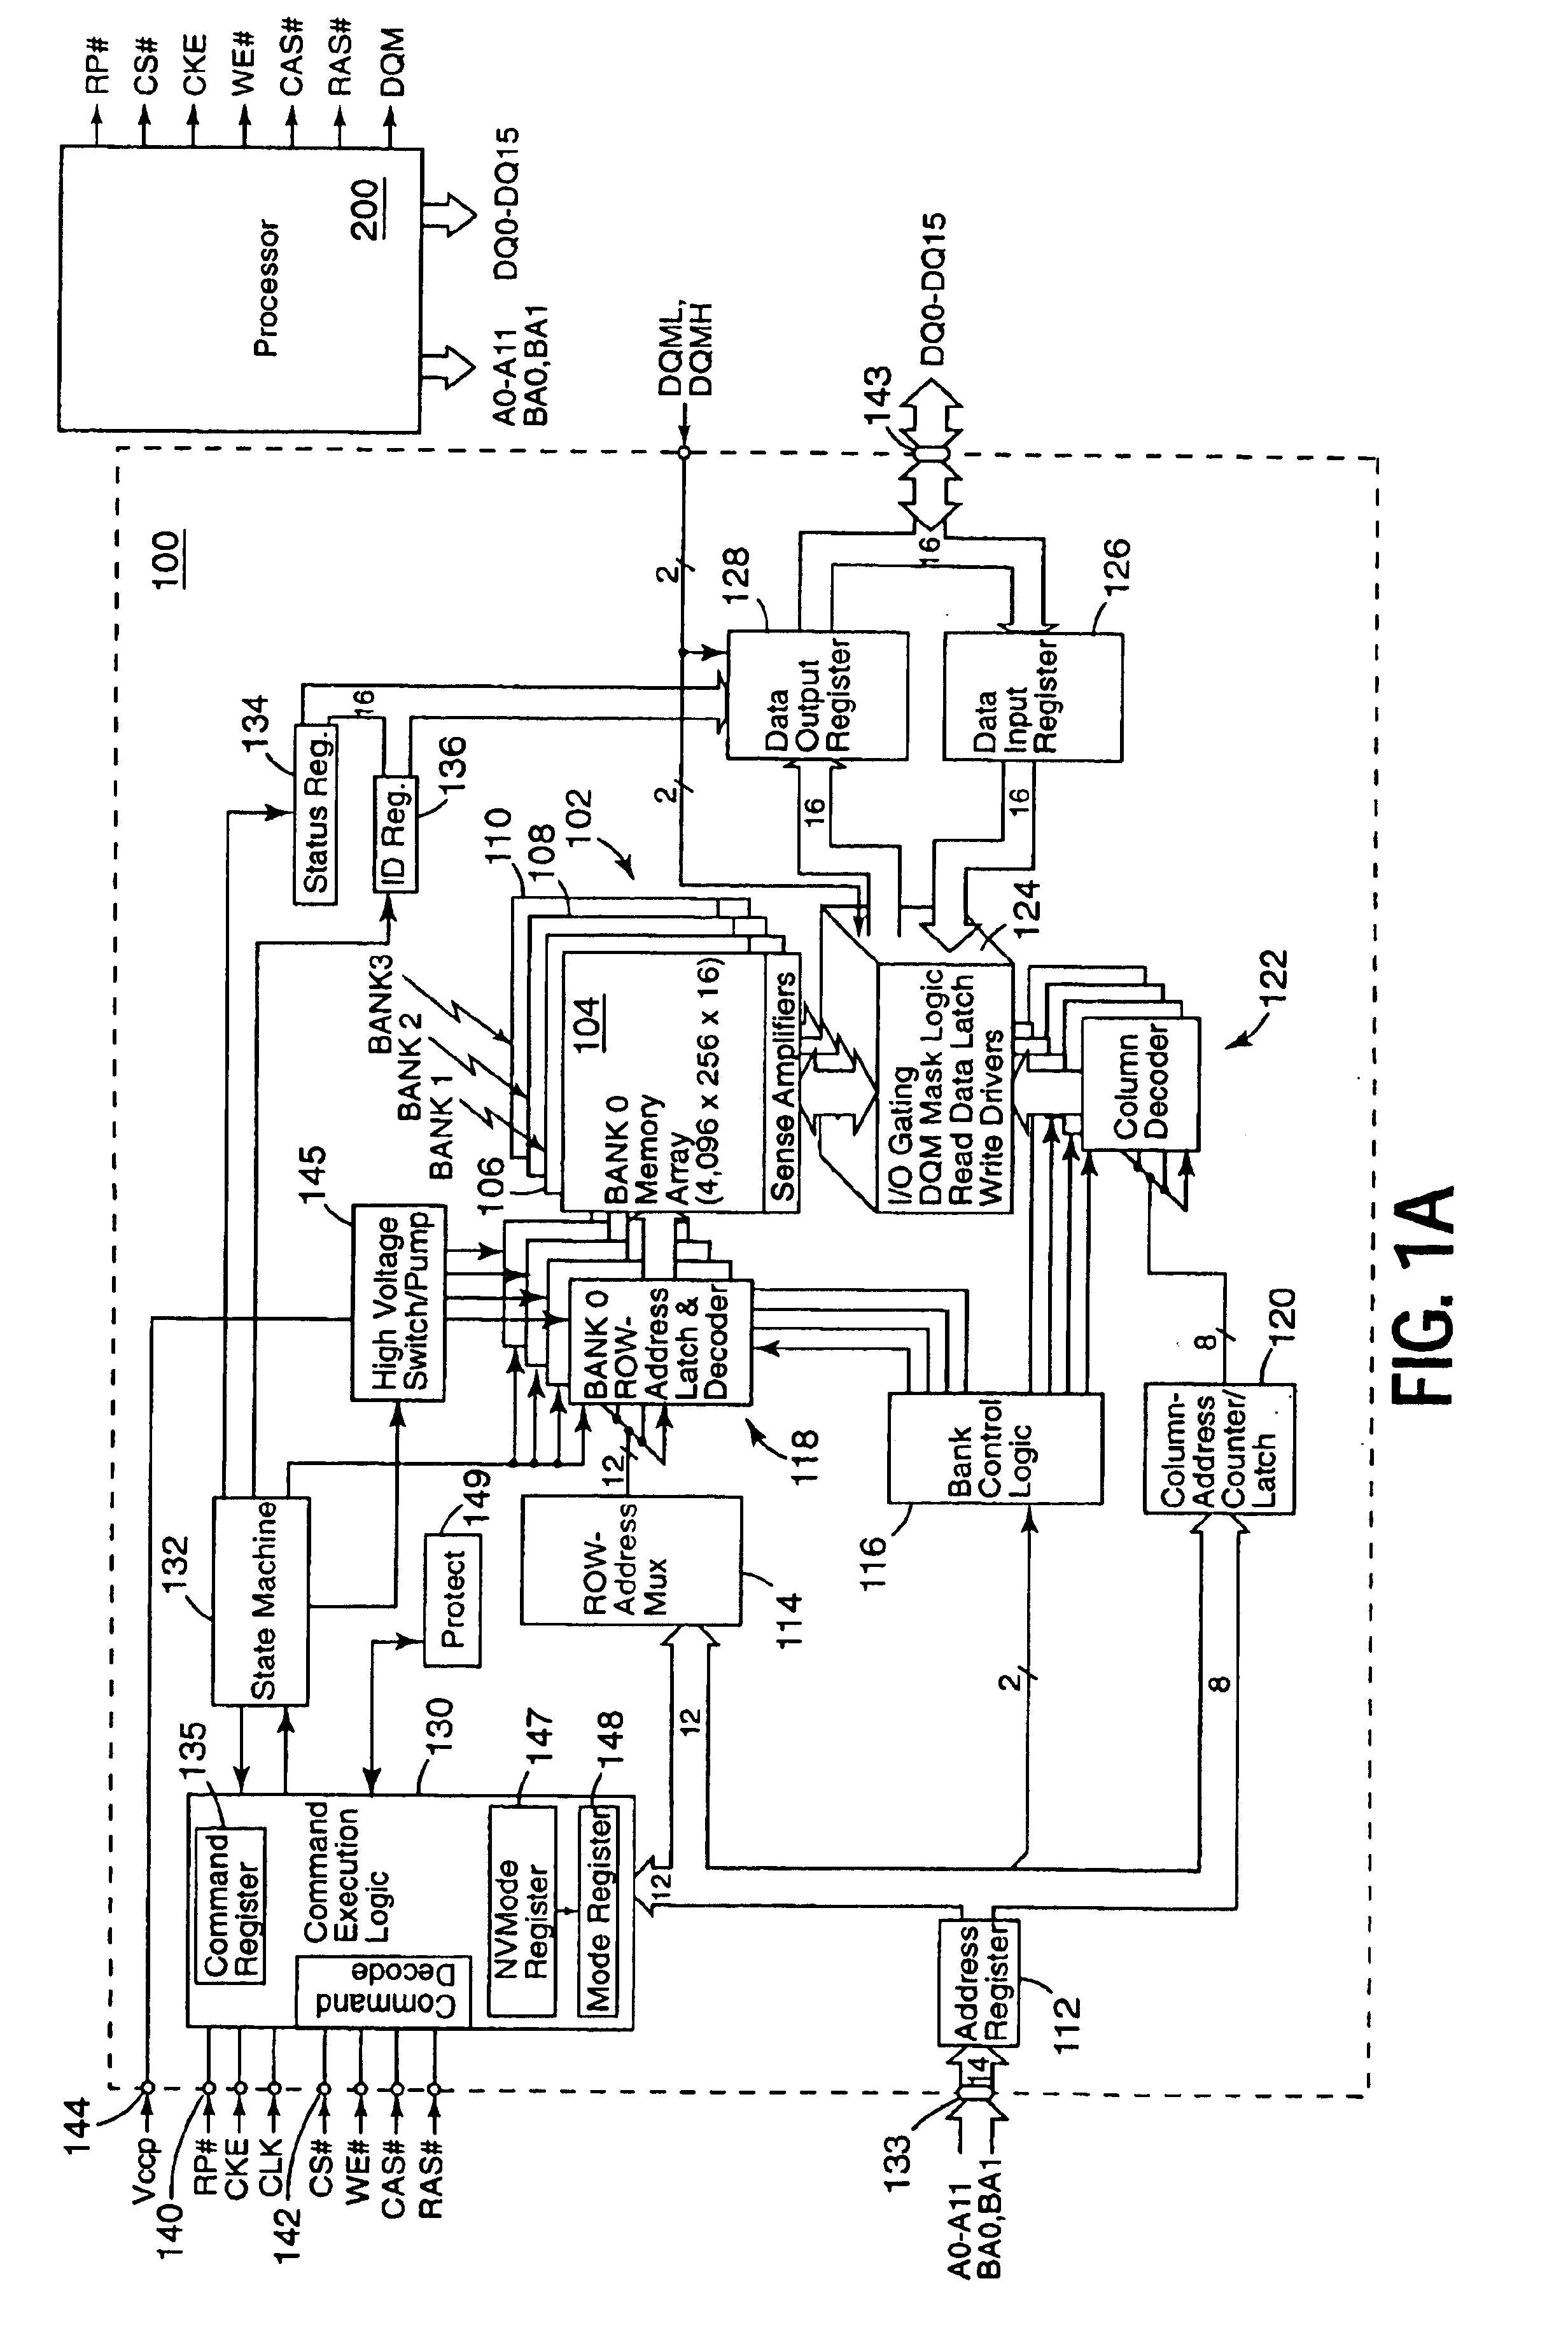 Synchronous flash memory with simultaneous access to one or more banks